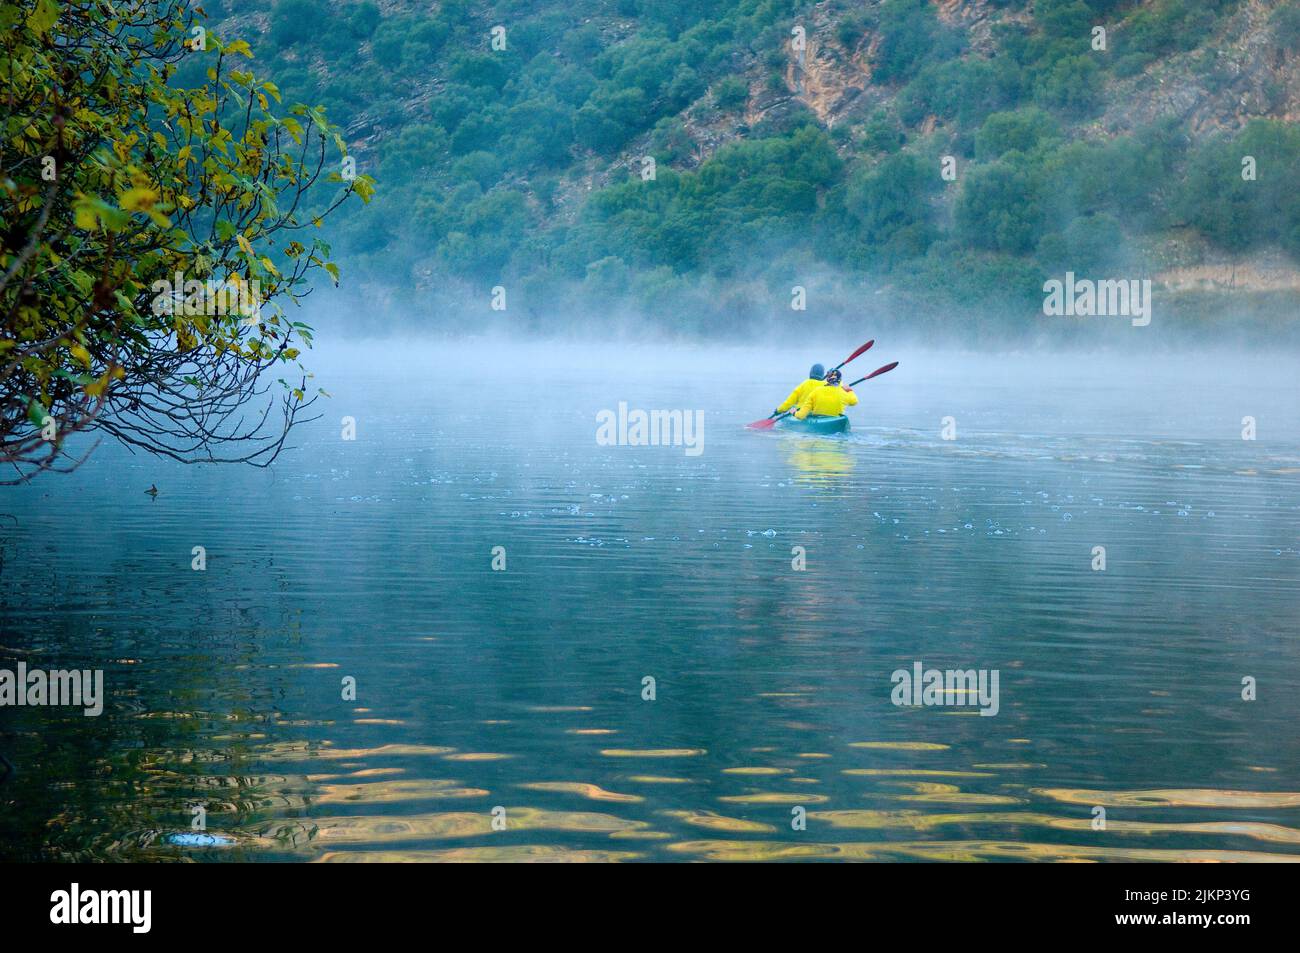 A kayaking trip on the Tagus River in central Spain Stock Photo